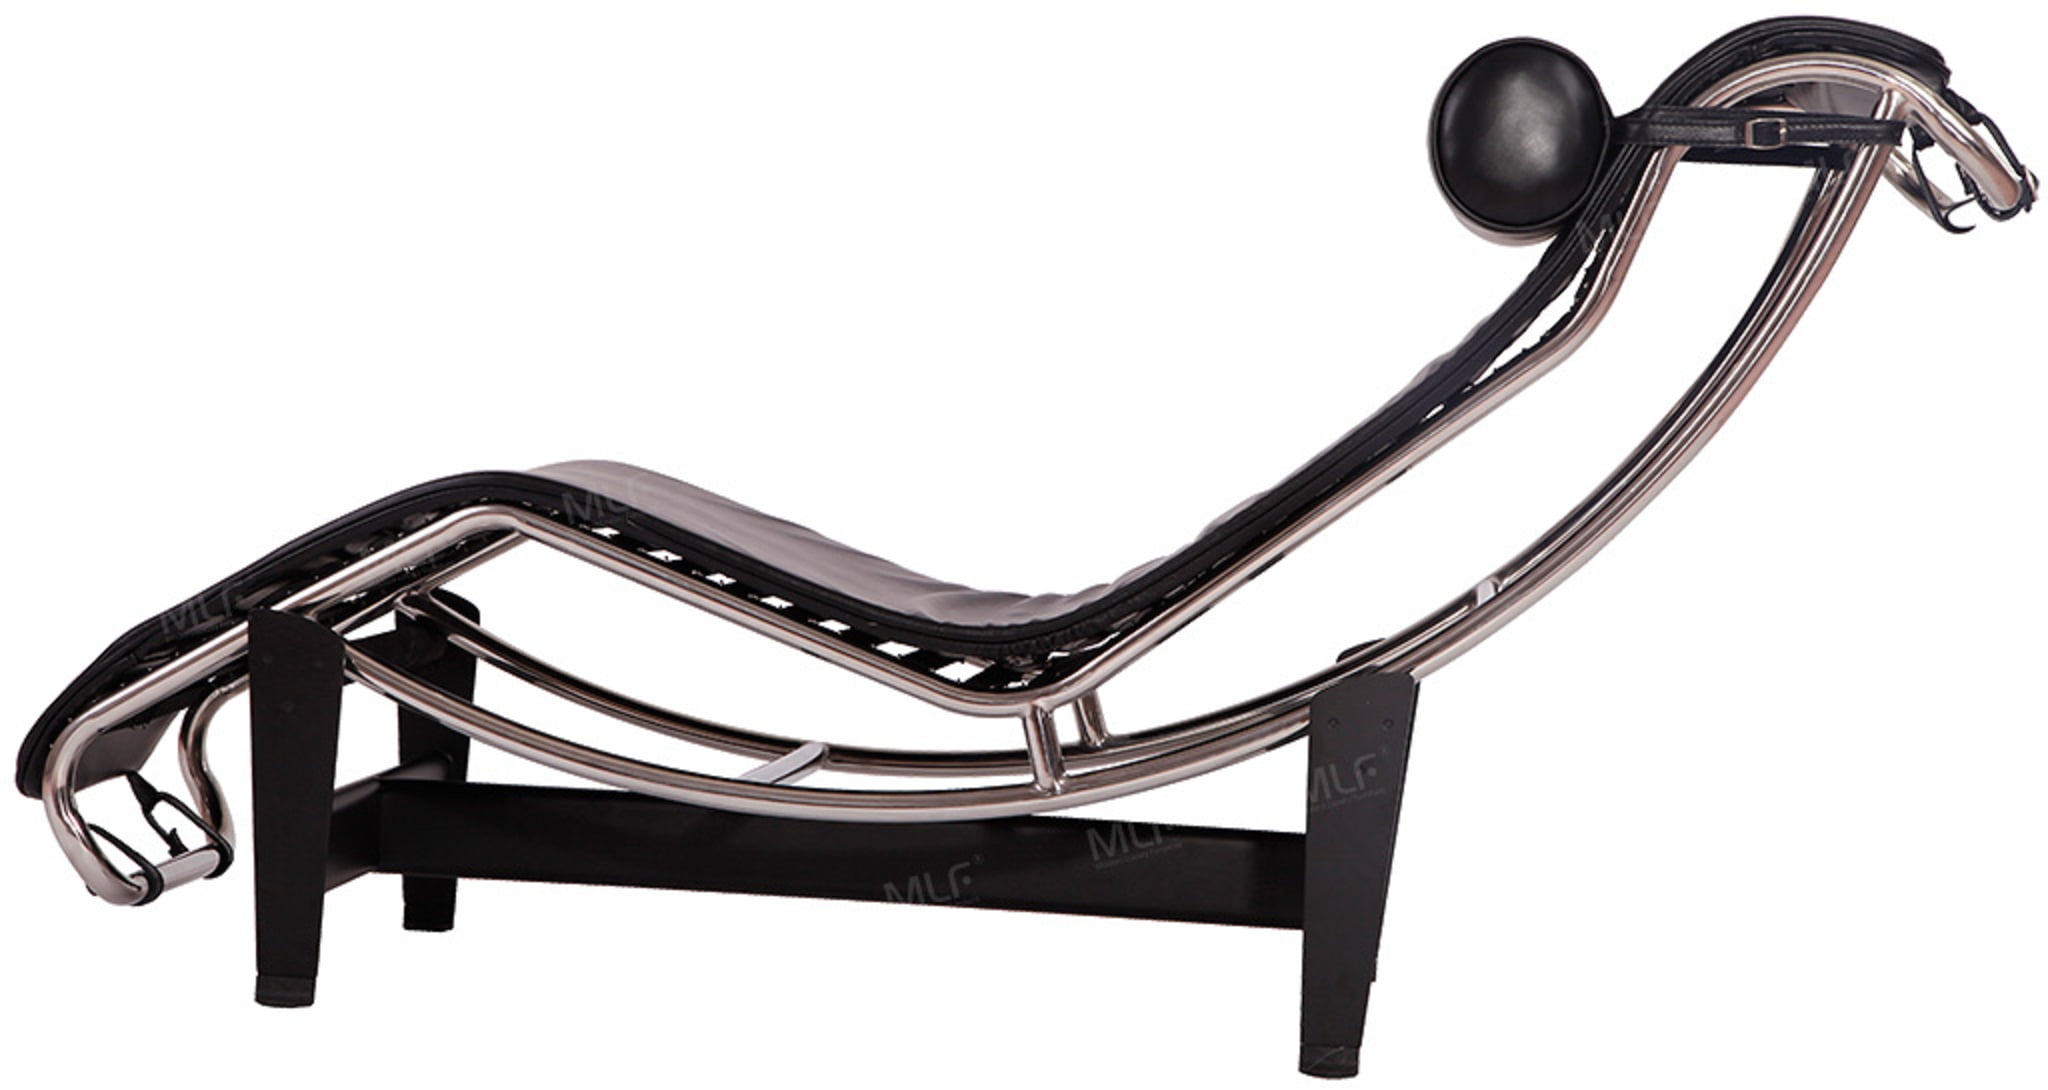 Le Corbusier LC4 Style Black Leather and Chrome Plated Chaise